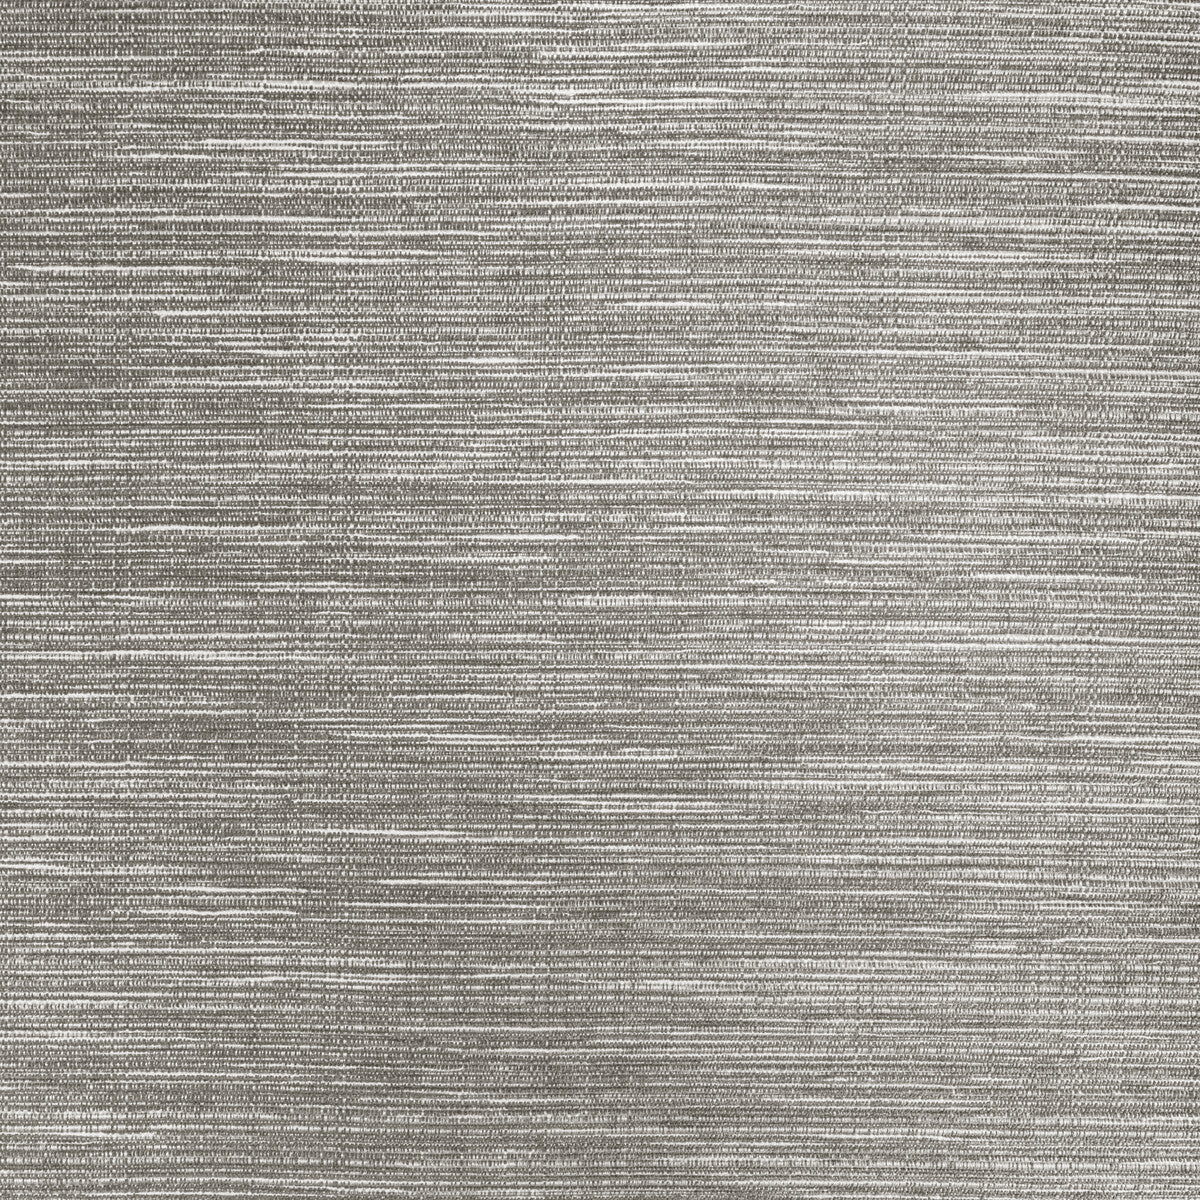 Patrasso fabric in steel color - pattern 36374.21.0 - by Kravet Basics